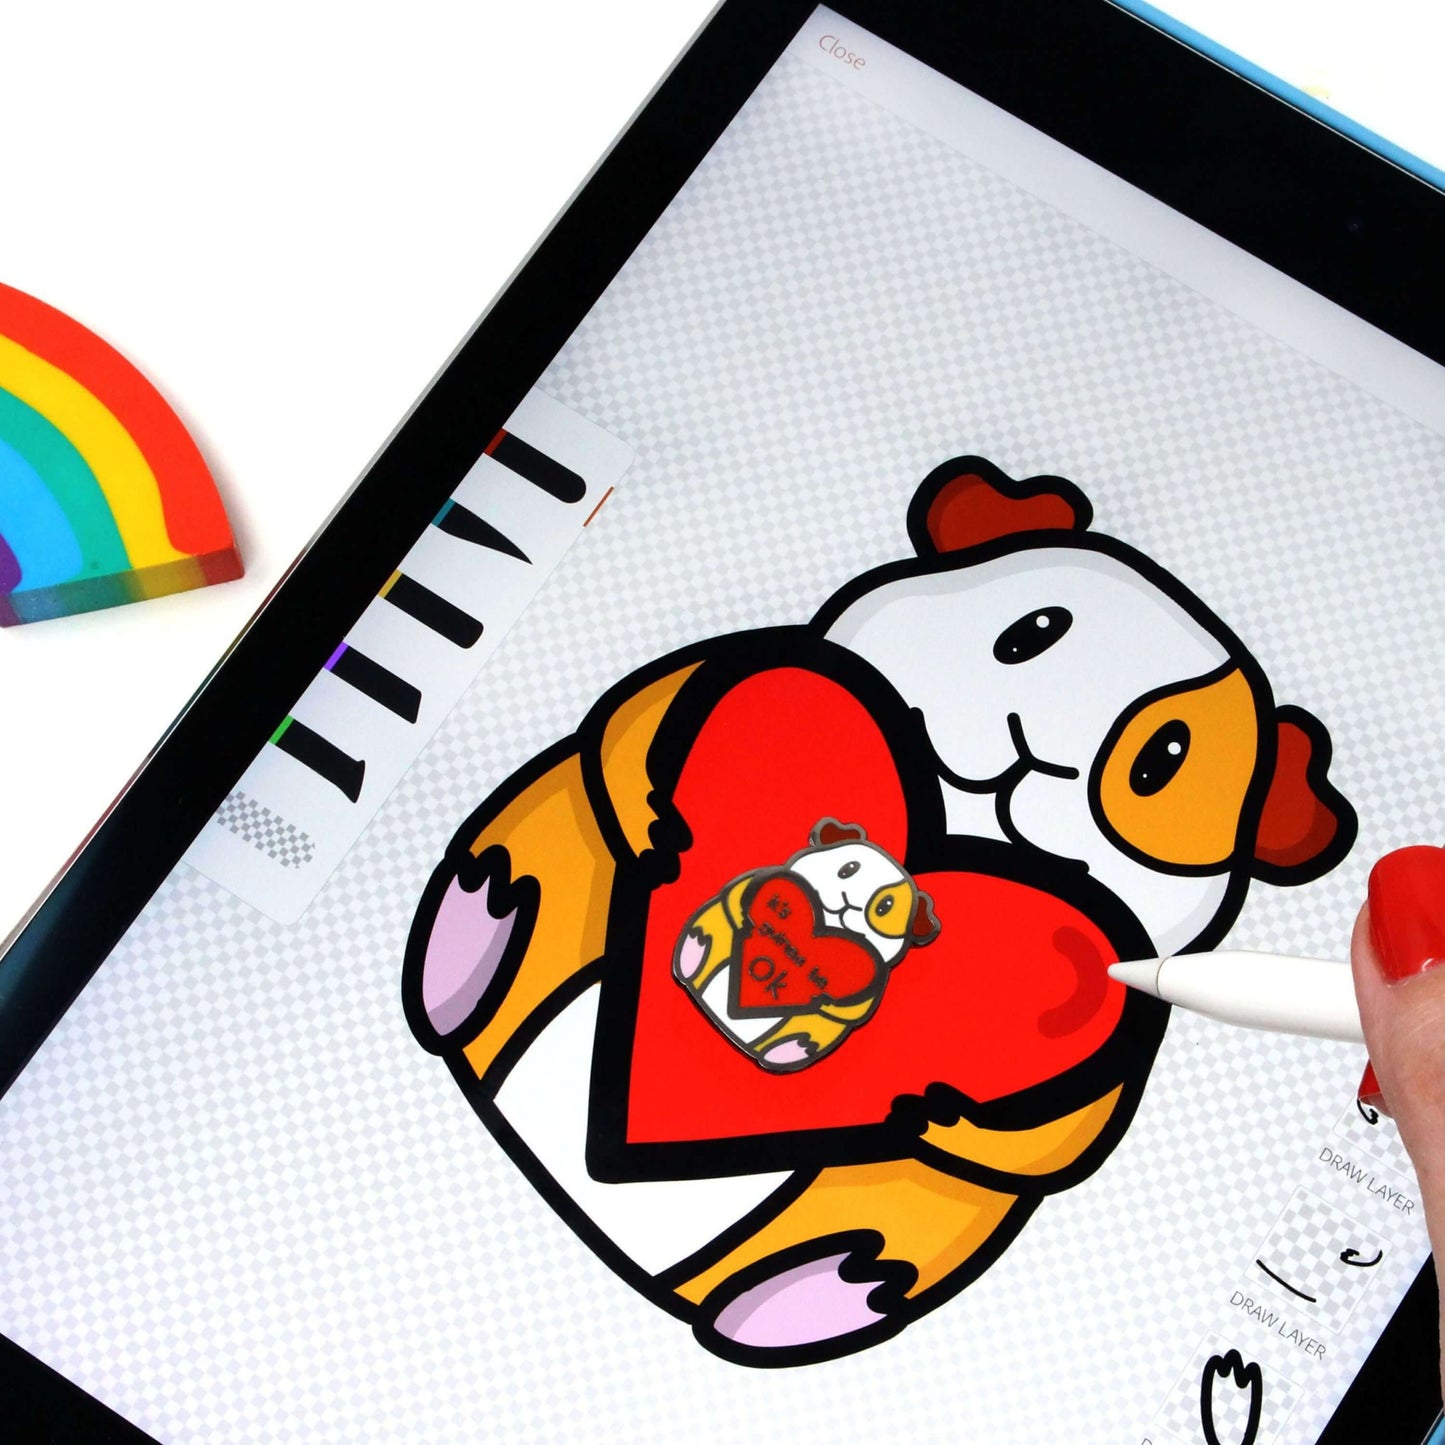 illustration for Guinea Pig Mental Health Enamel Pin being drawn on iPad. The enamel pin is of a smiling guinea pig holding a big red heart with the text it's guinea be ok inside. The enamel pin is deigned to raise awareness for mental health.